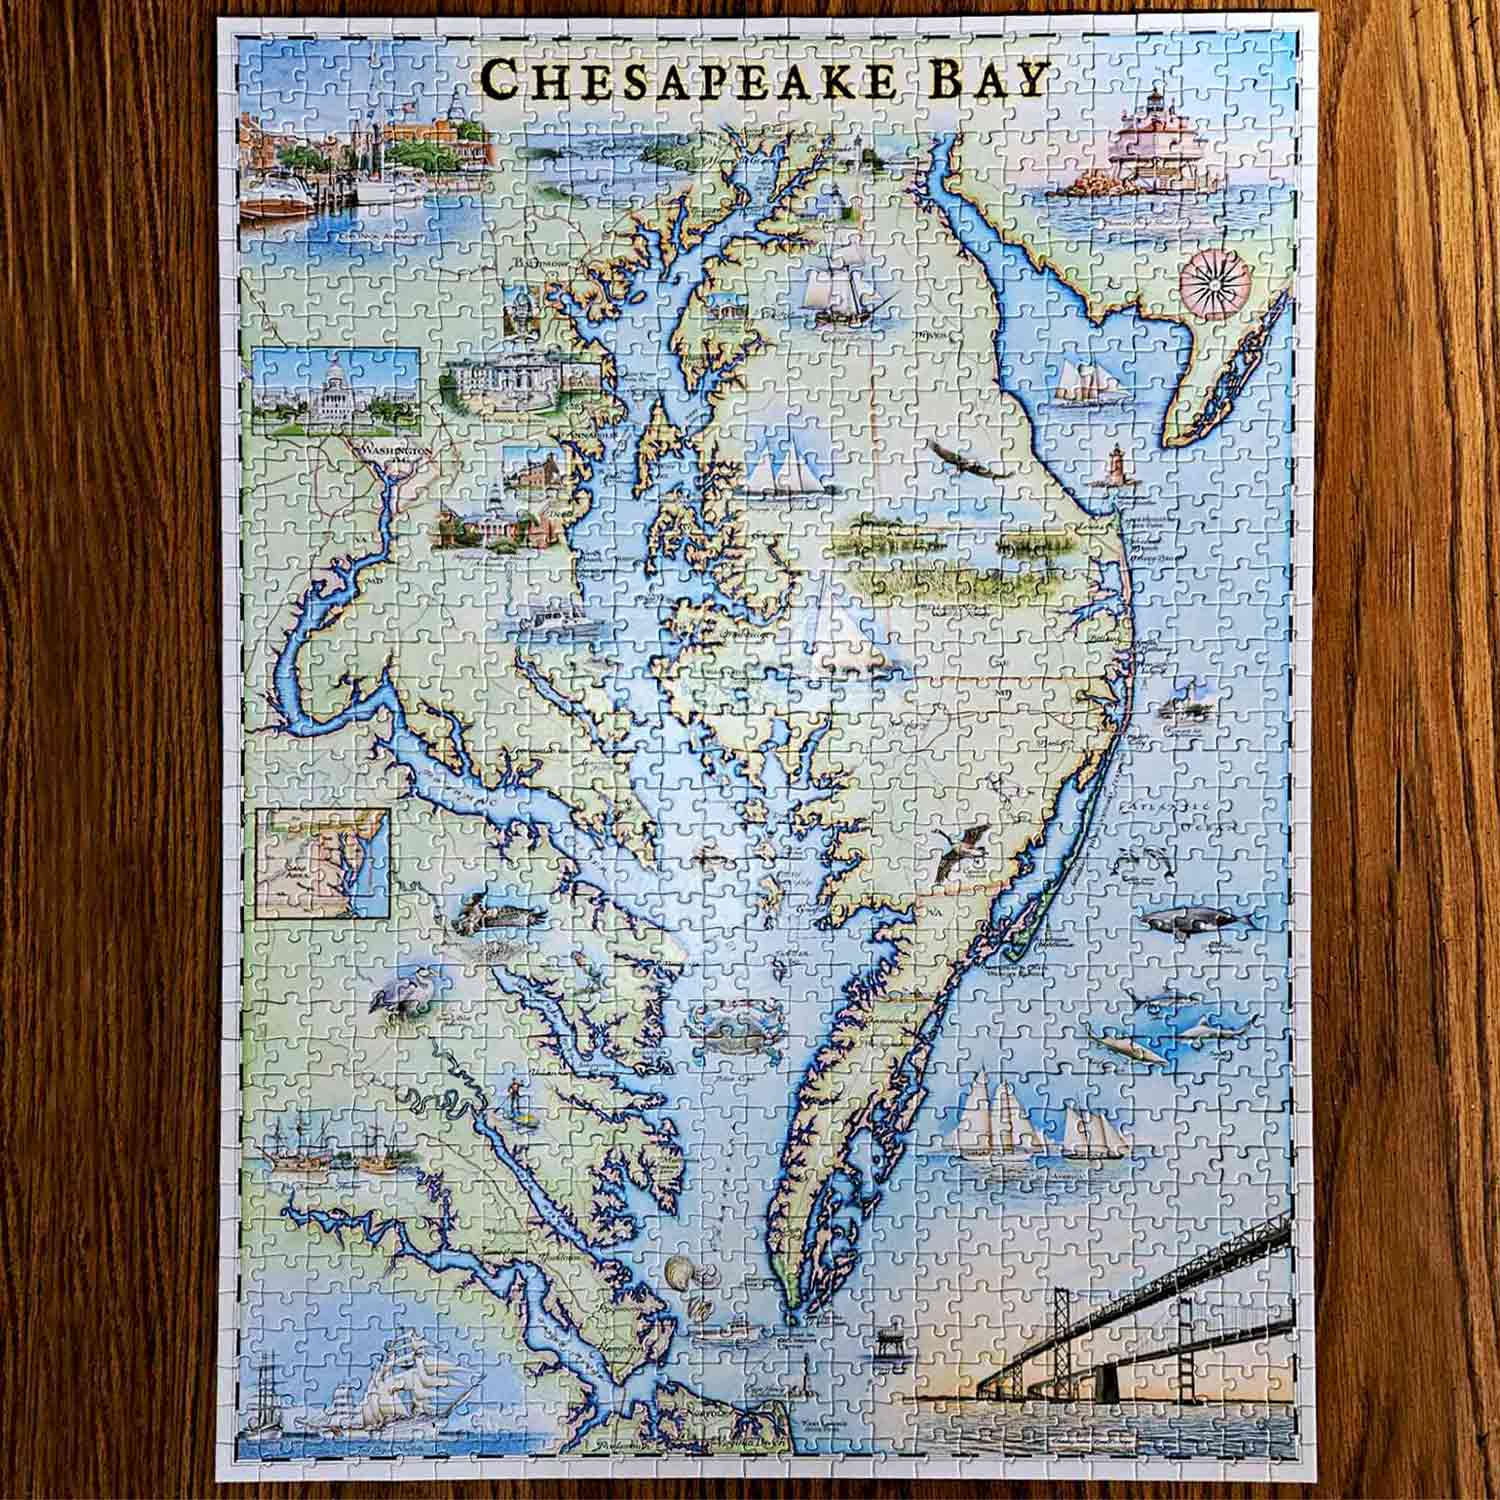 Chesapeake Bay Puzzle on a wood table completed.